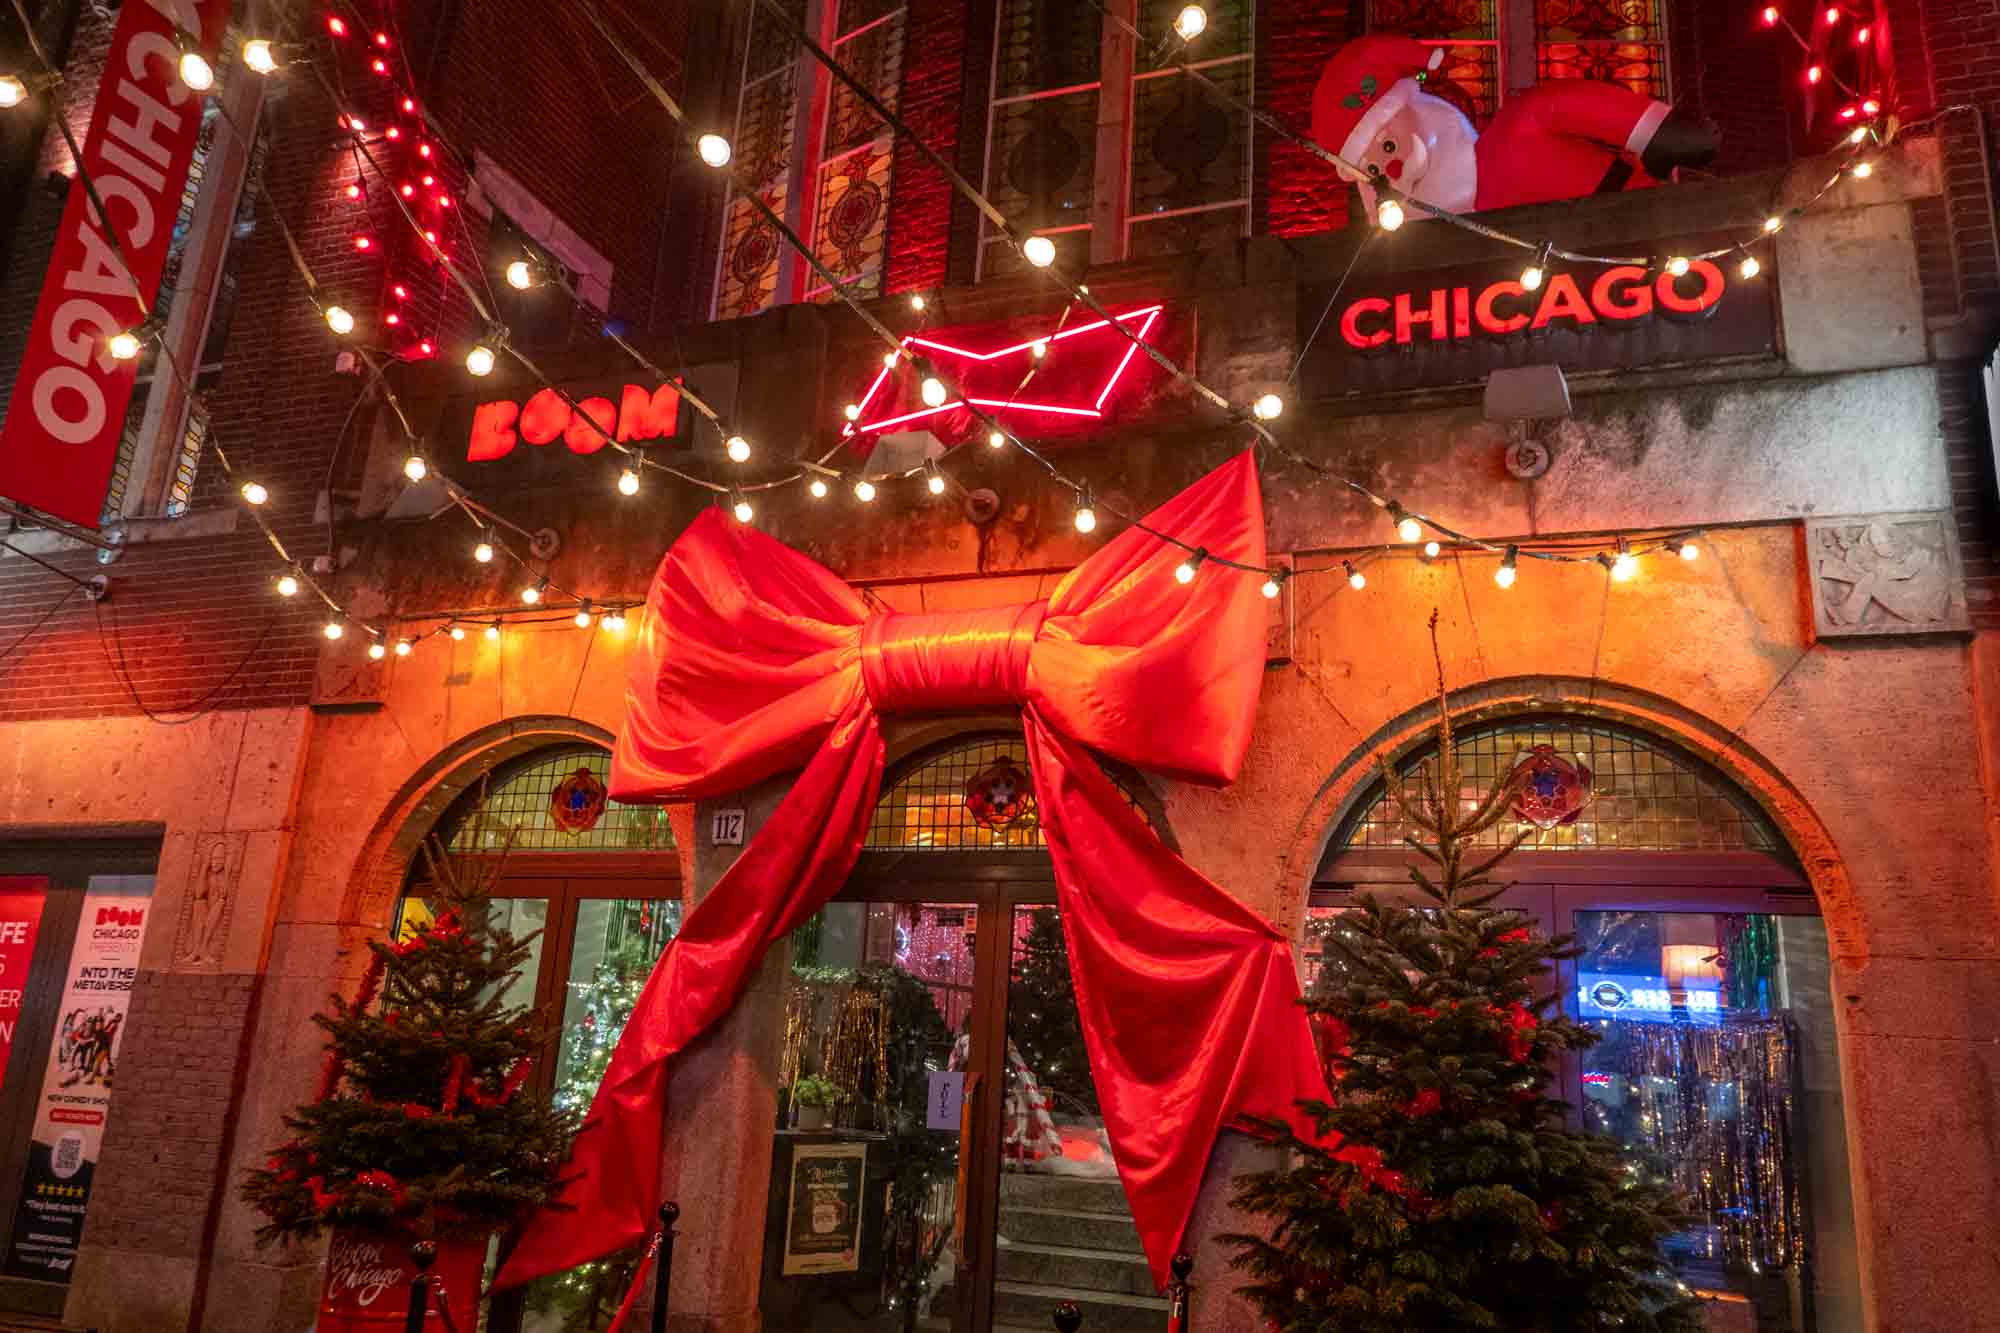 Storefront with a giant red bow and Christmas decorations and a sign for "Boom Chicago"